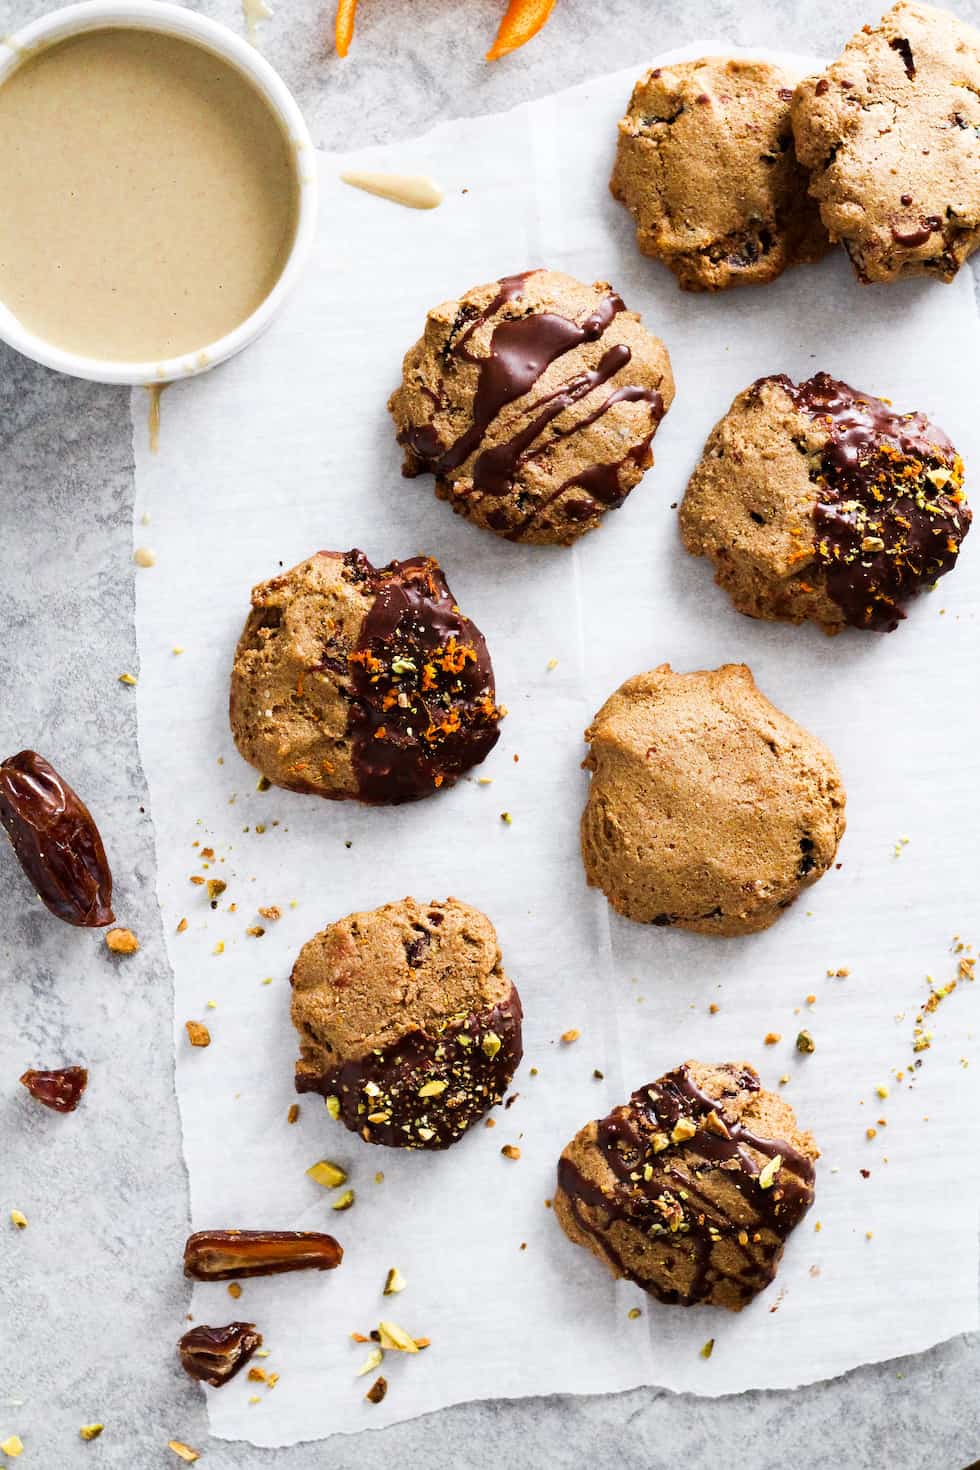 Tahini cookies on parchment paper. Some cookies are dipped in chocolate. Small bowl of tahini in corner.